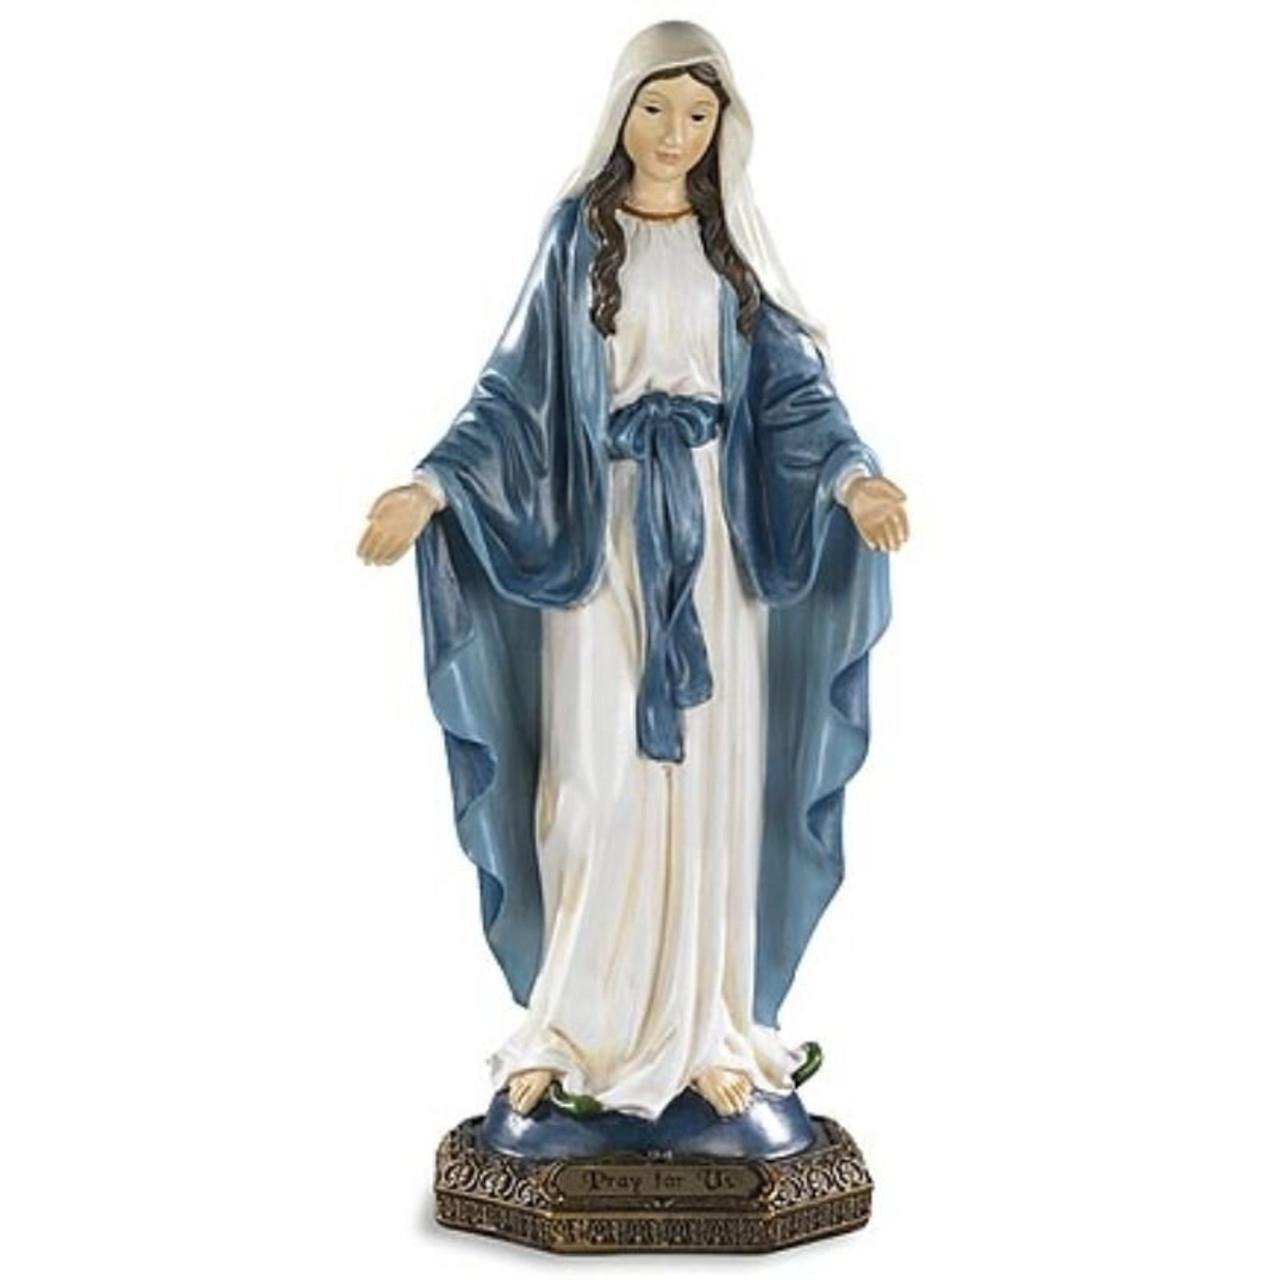 Hartland Our Lady of Grace Plastic Madonna 12 Inch Virgin Mary Statue Figure